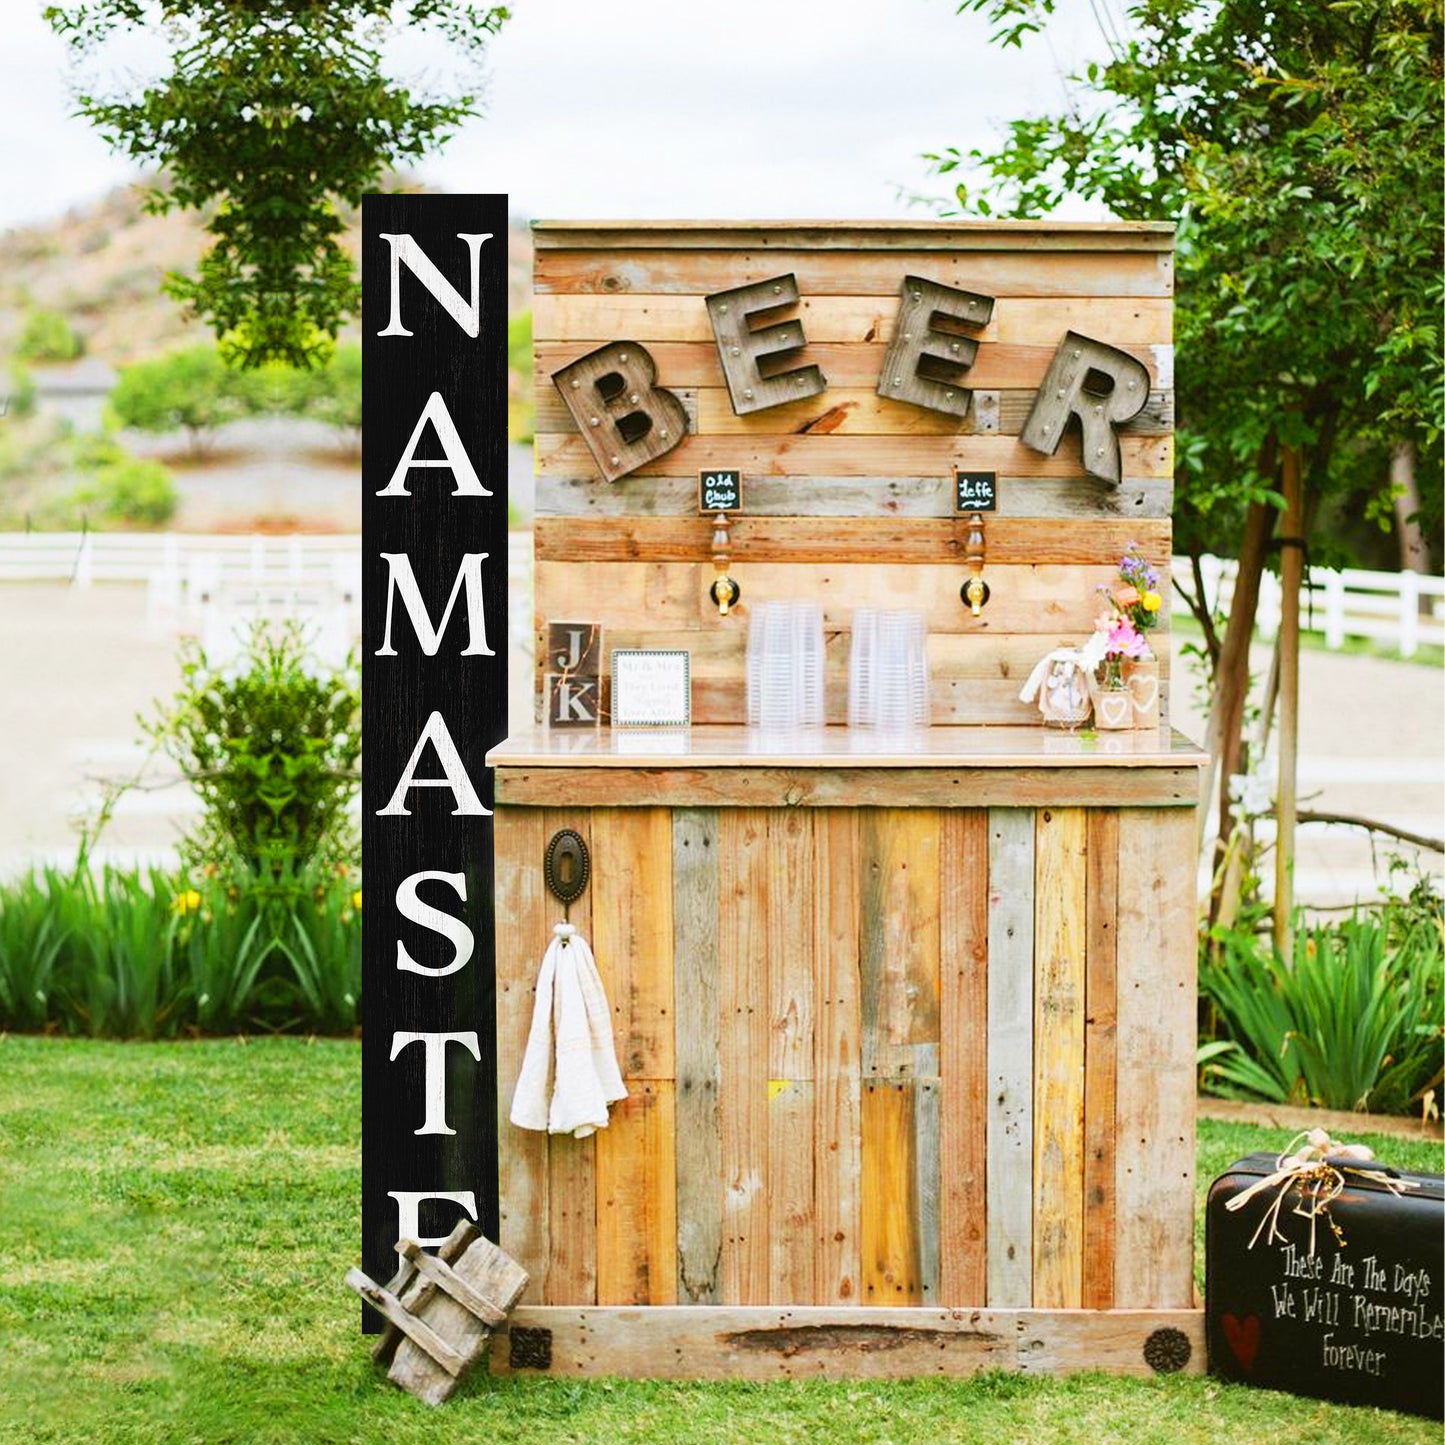 Namaste Wooden Porch Sign - Rustic 72" Welcome Decor - Mindful Home Entryway Gift fun door sign